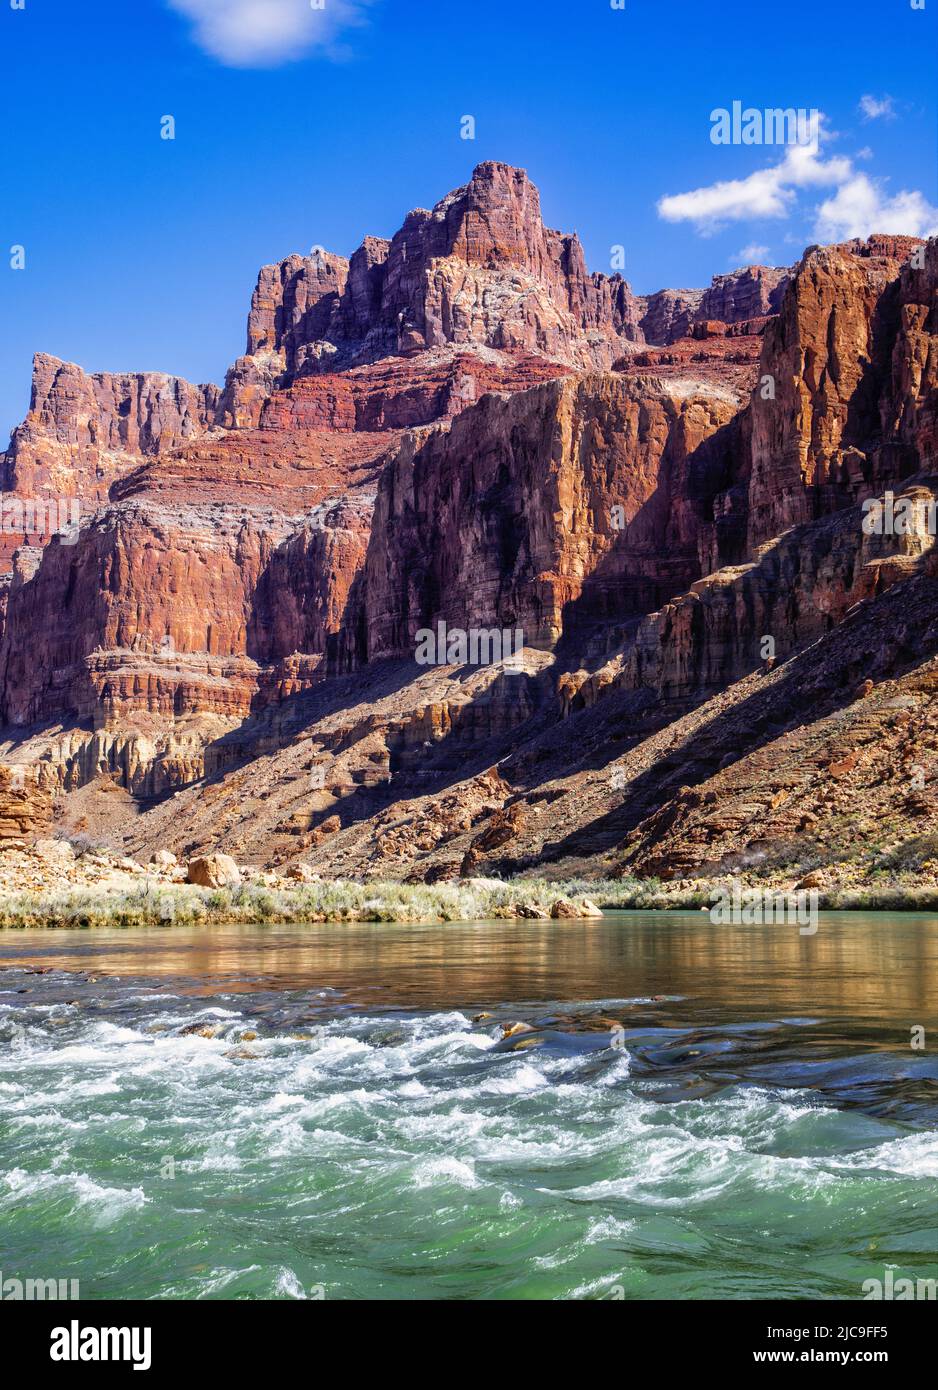 The Colorado River takes a turn where it connects with the Little Colorado River in the Grand Canyon of Arizona. Stock Photo